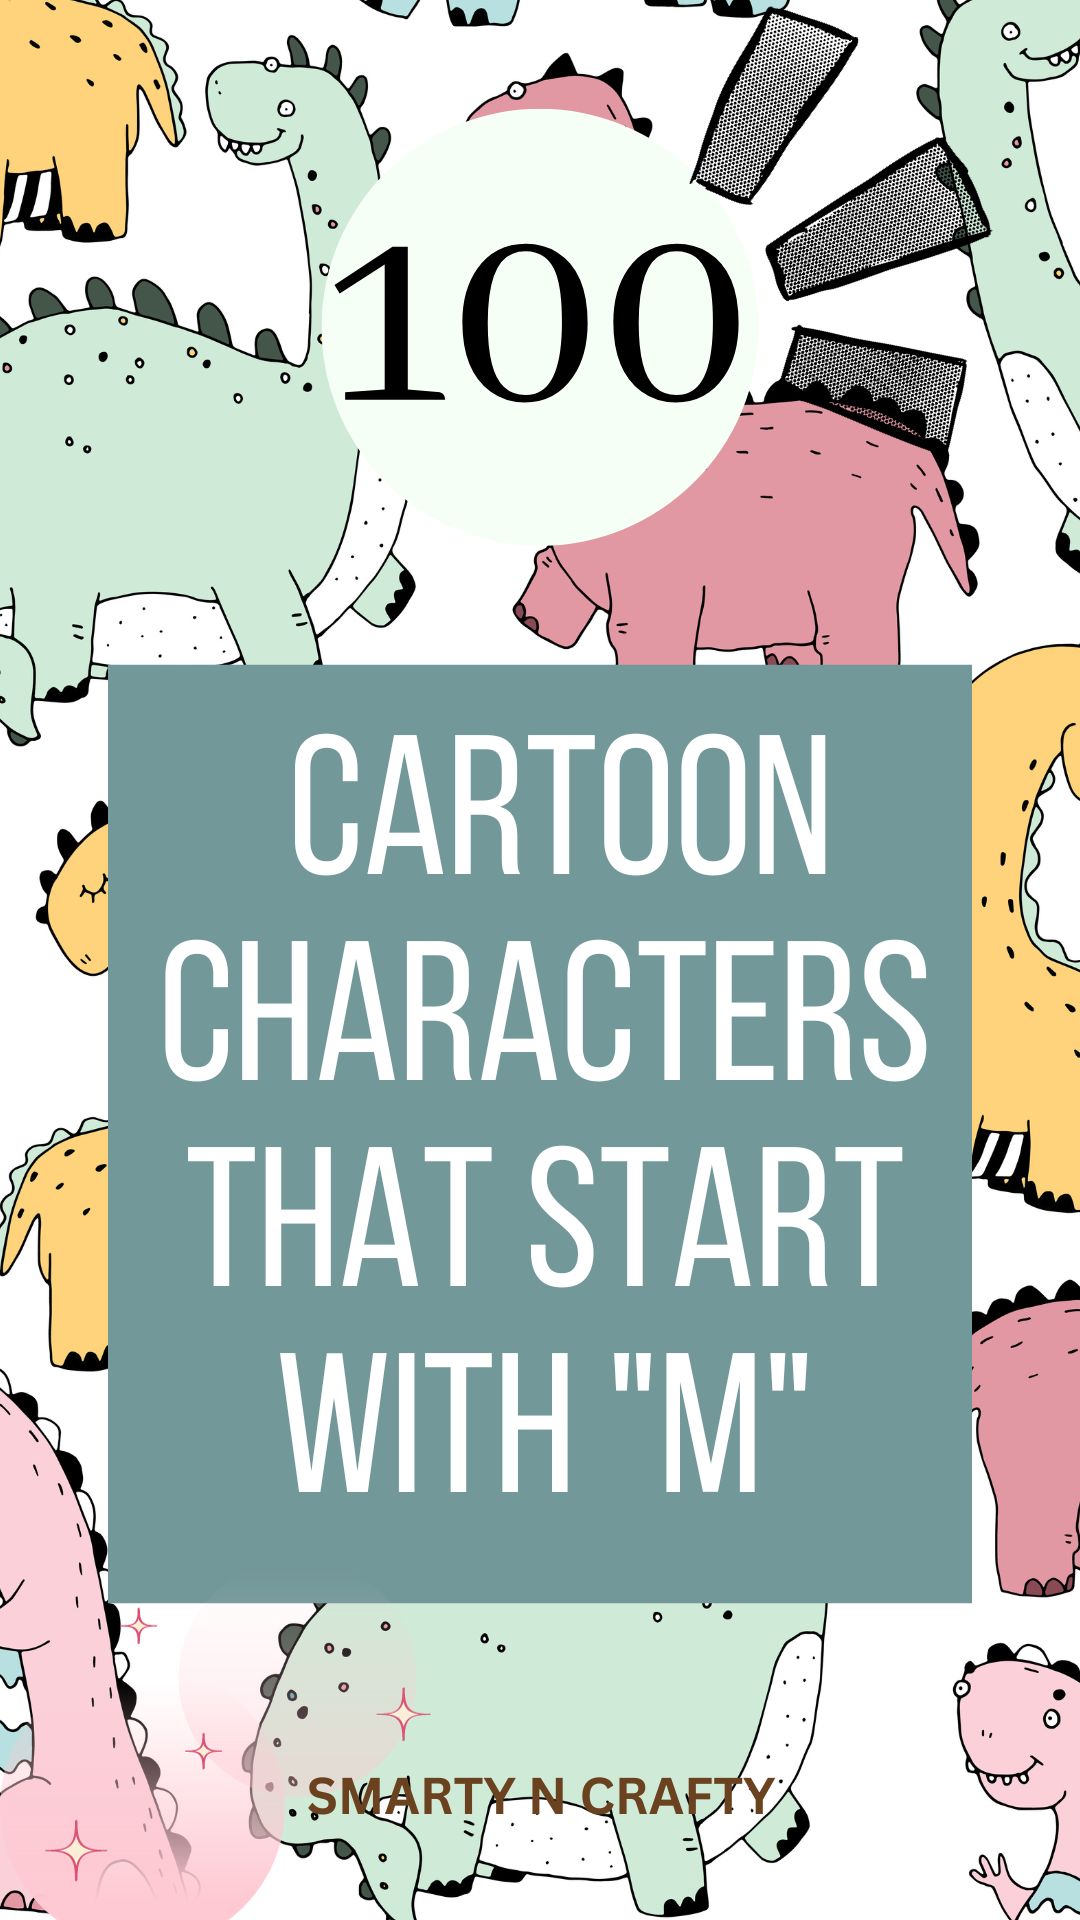 Cartoon Characters that Start with M